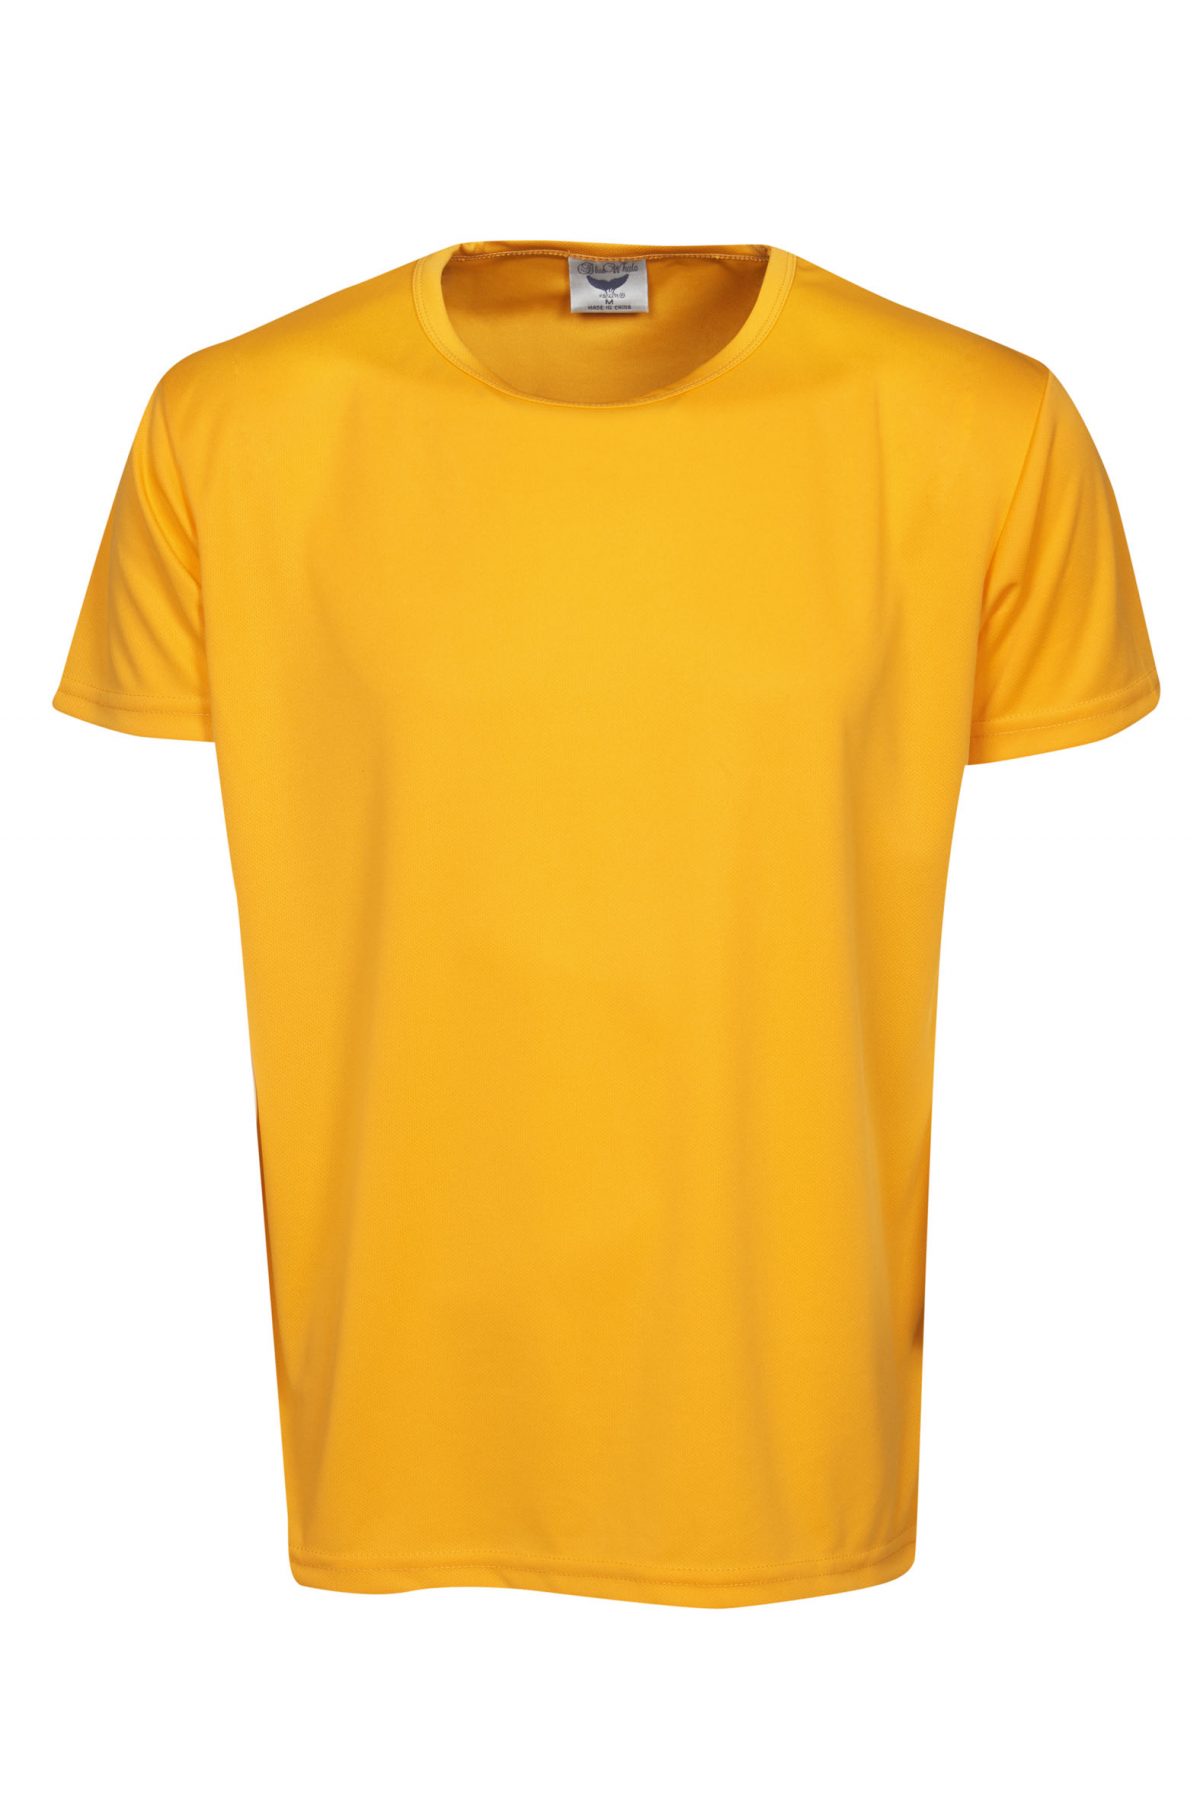 T41 Light Weight Cooldry T-Shirts - Blue Whale